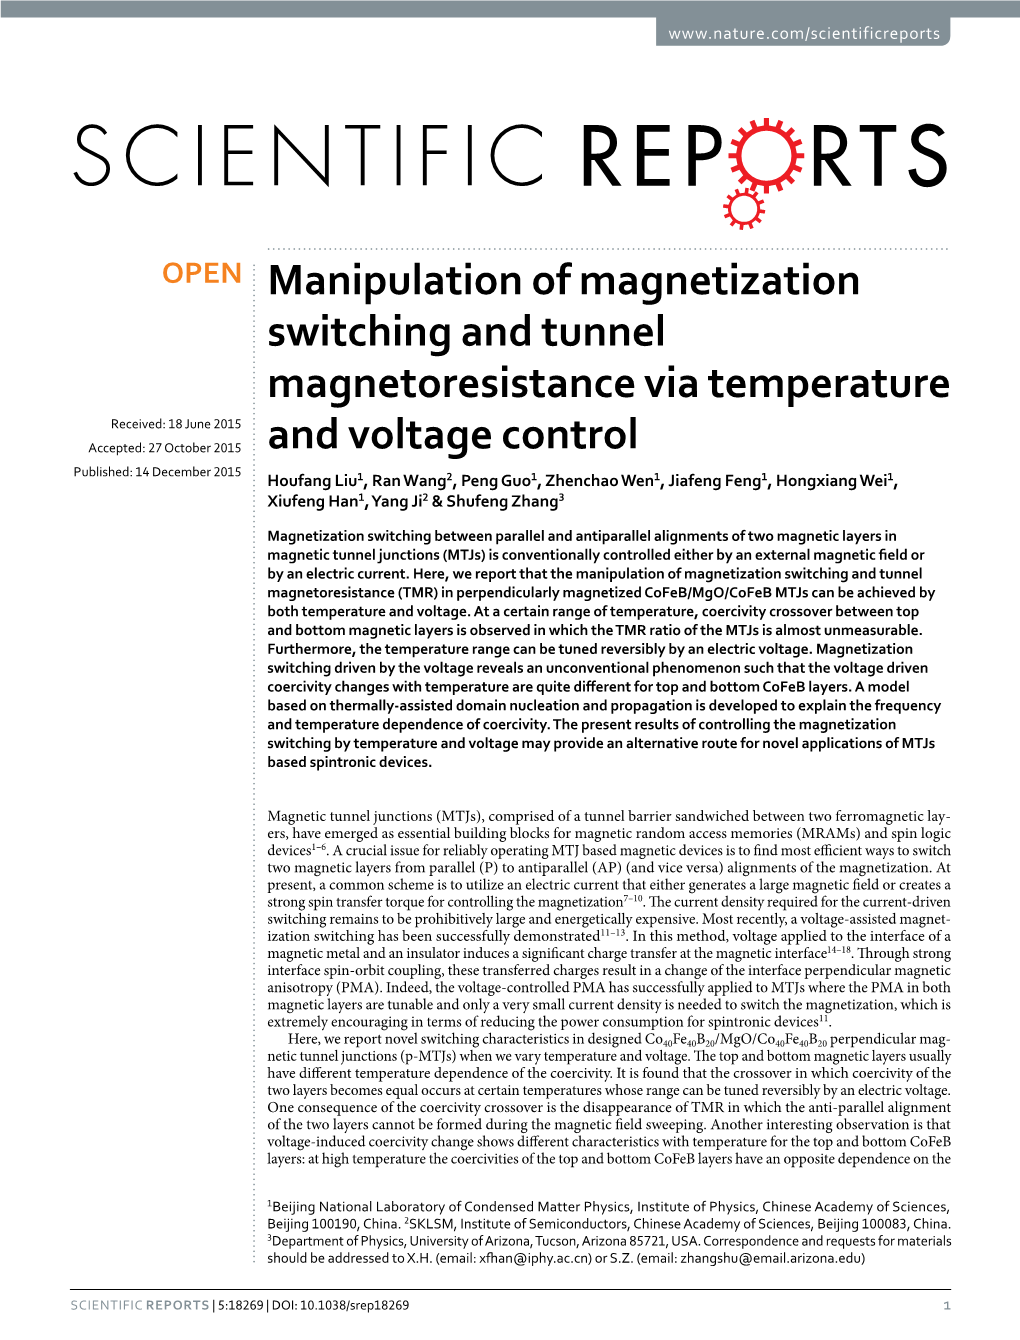 Manipulation of Magnetization Switching and Tunnel